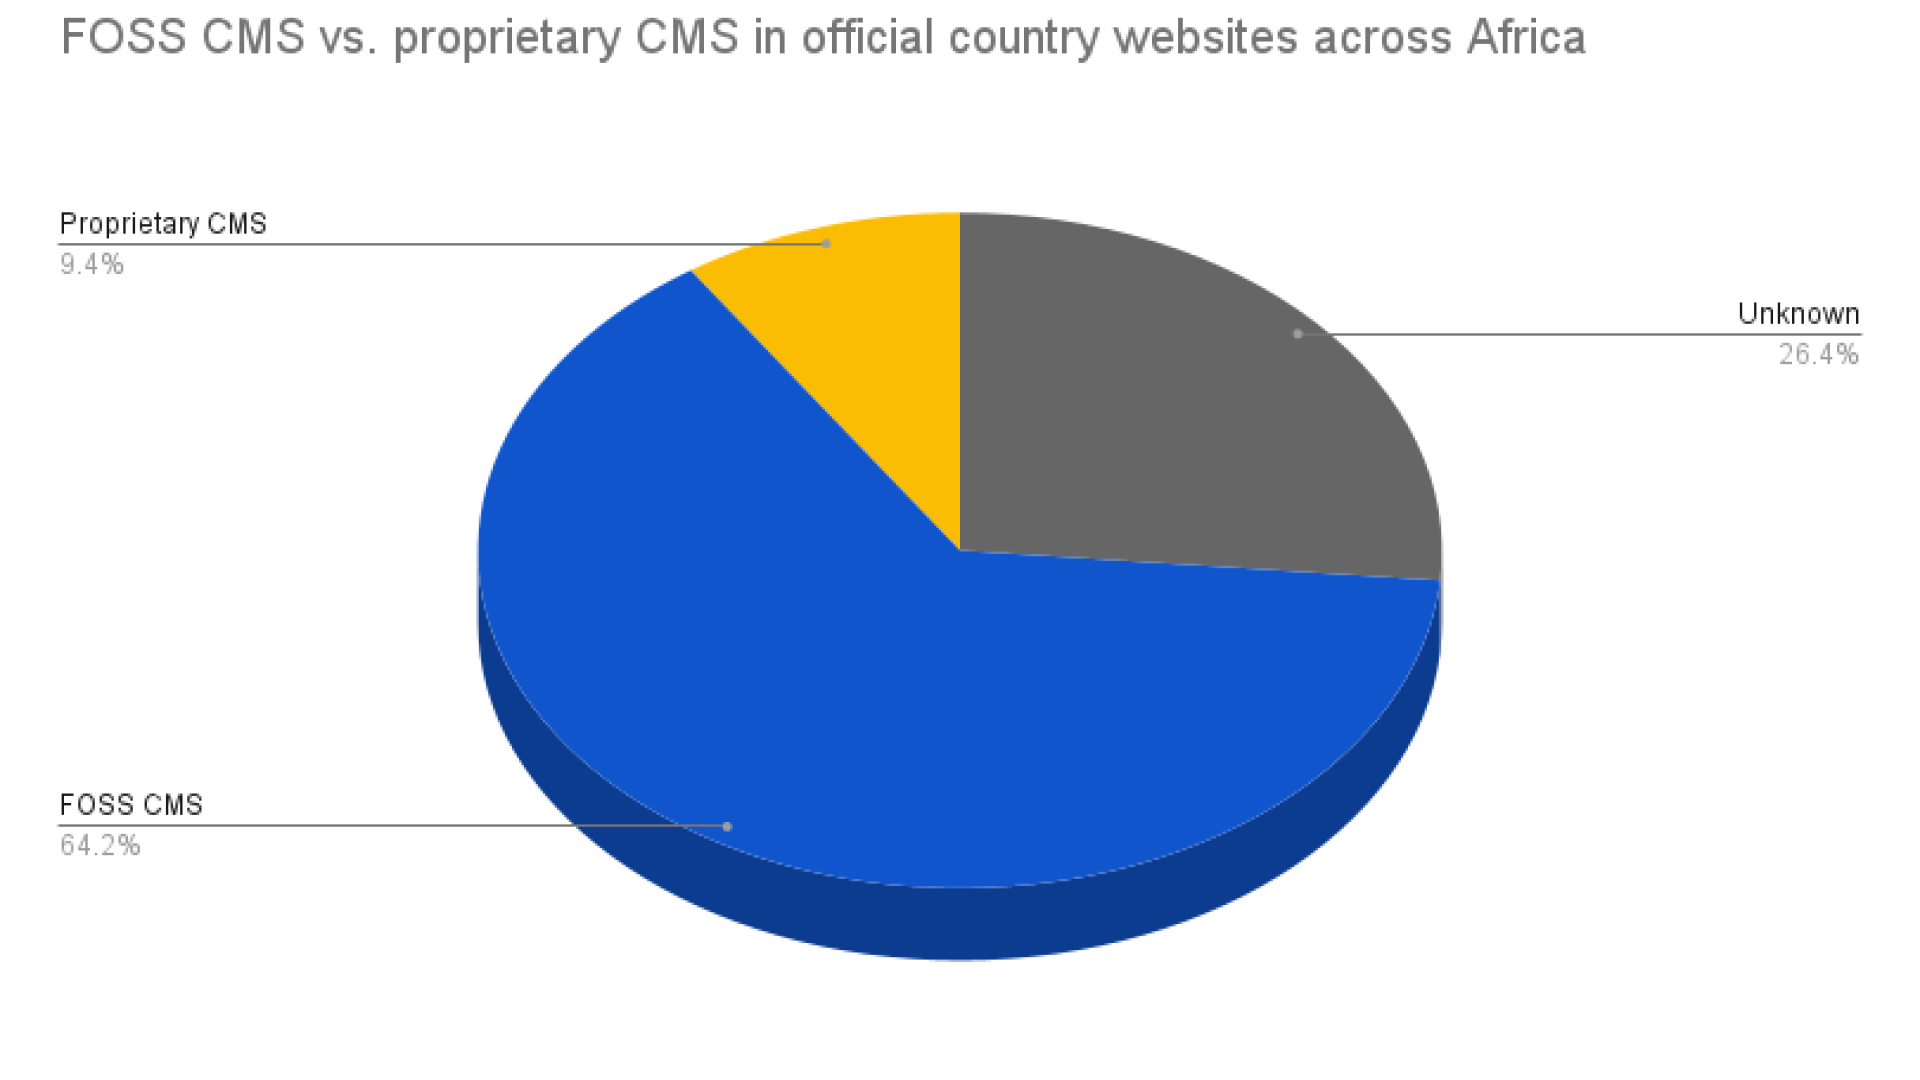 FOSS CMS Vs. proprietary CMS in official country websites in the African continent. 